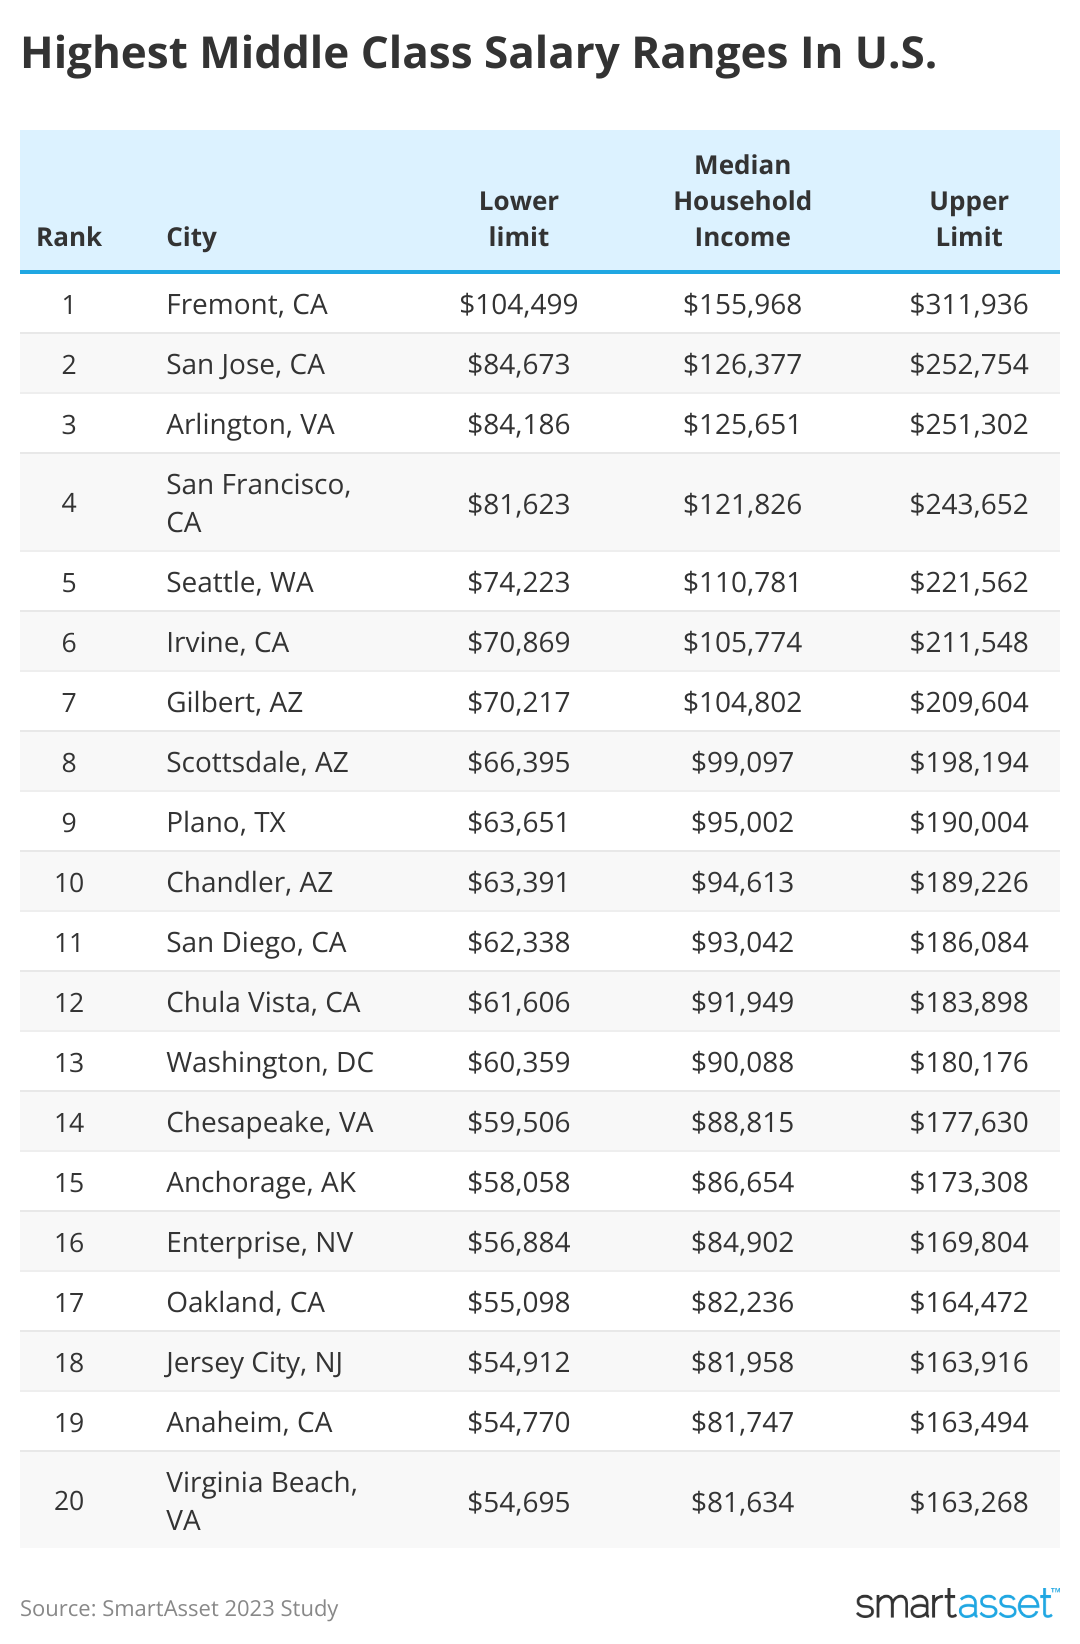 Table showing highest middle-class salary ranges in the US.